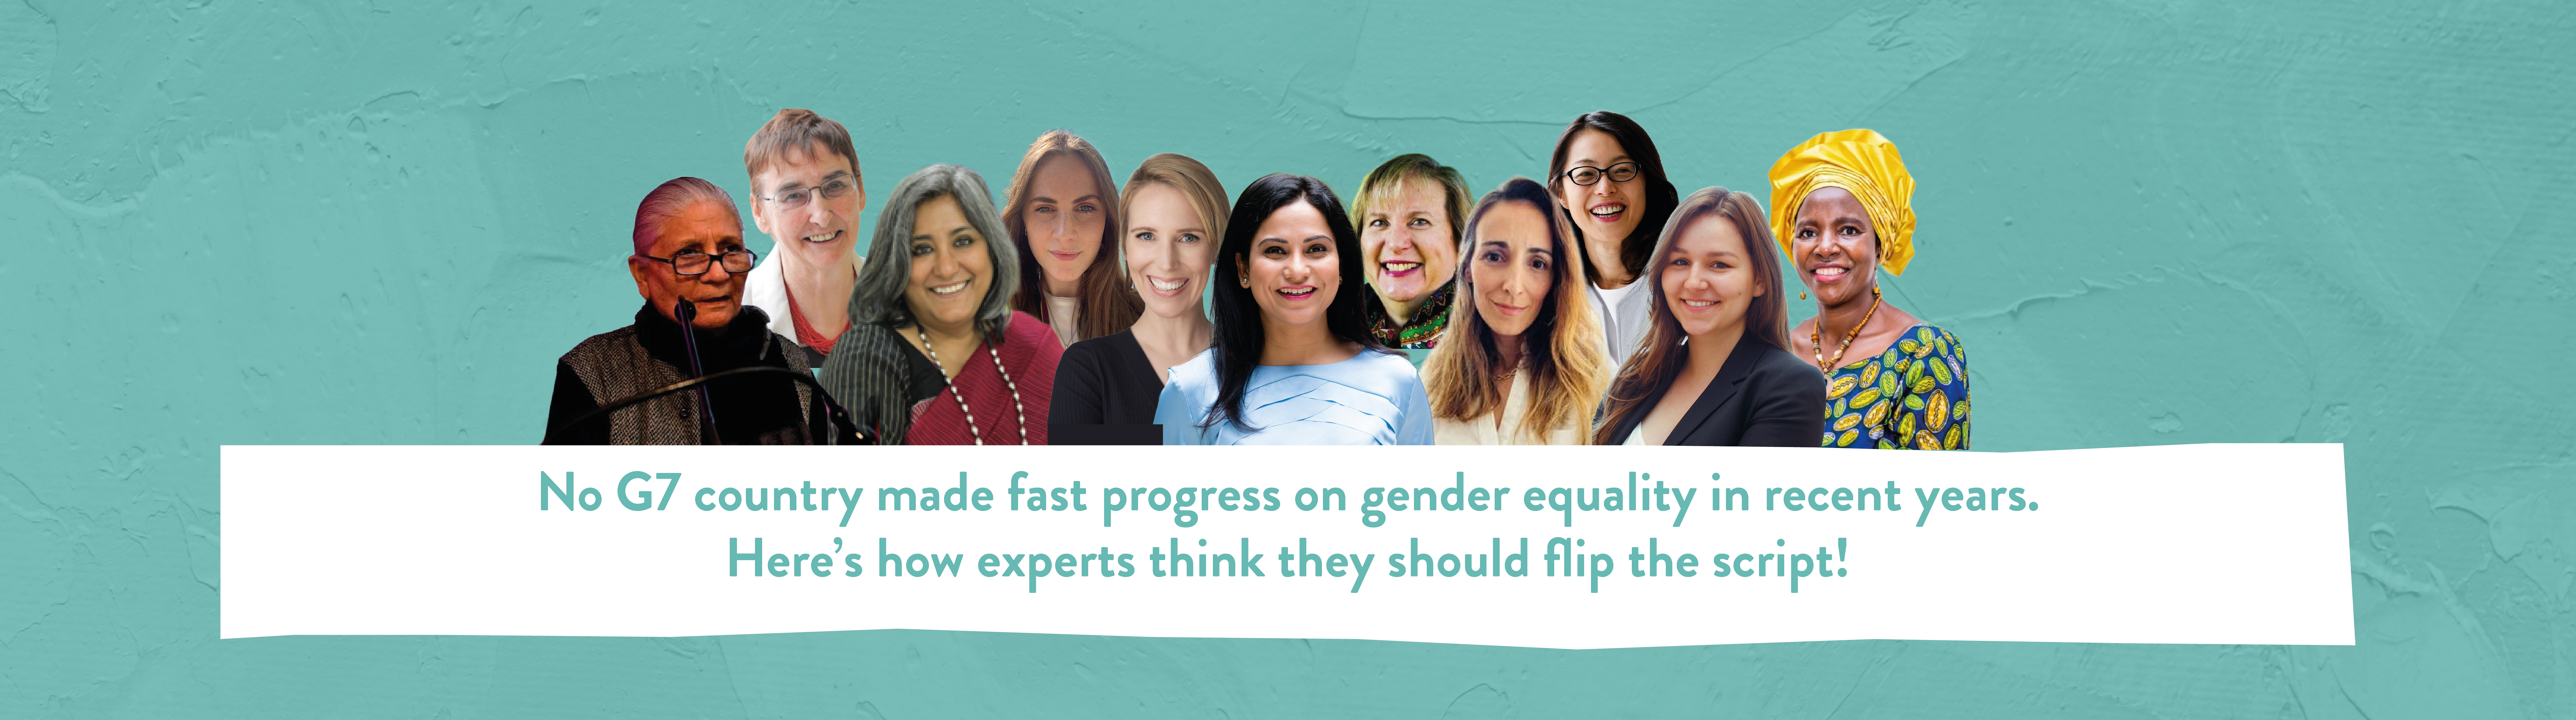 No G7 country made fast progress on gender equality in recent years. Here’s how experts think they should flip the script! 